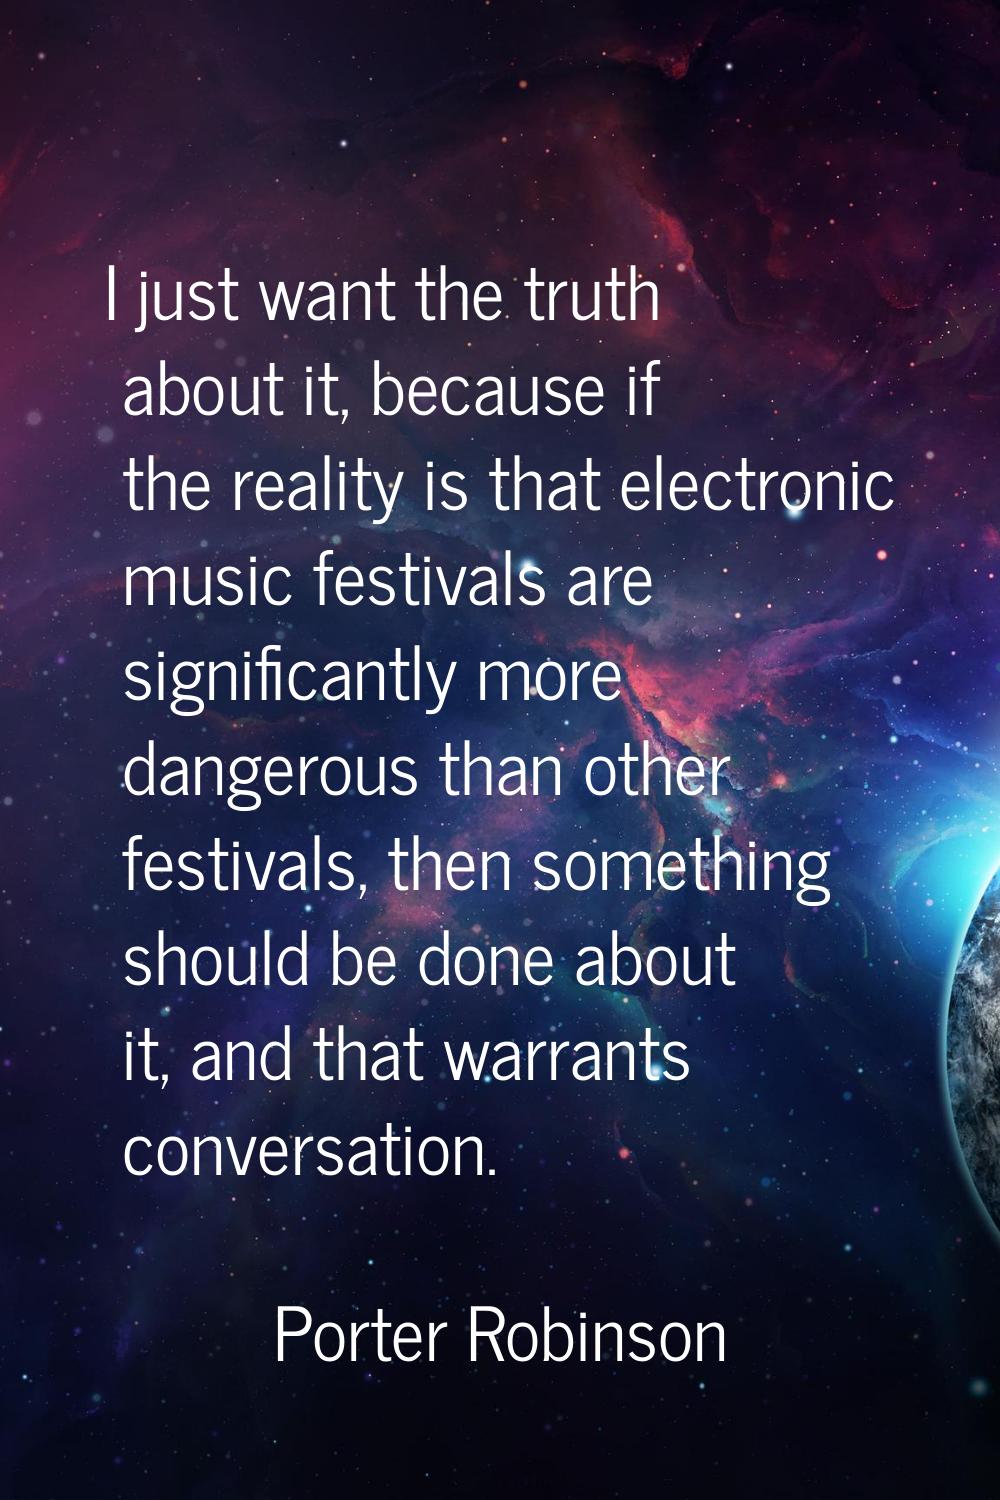 I just want the truth about it, because if the reality is that electronic music festivals are signi